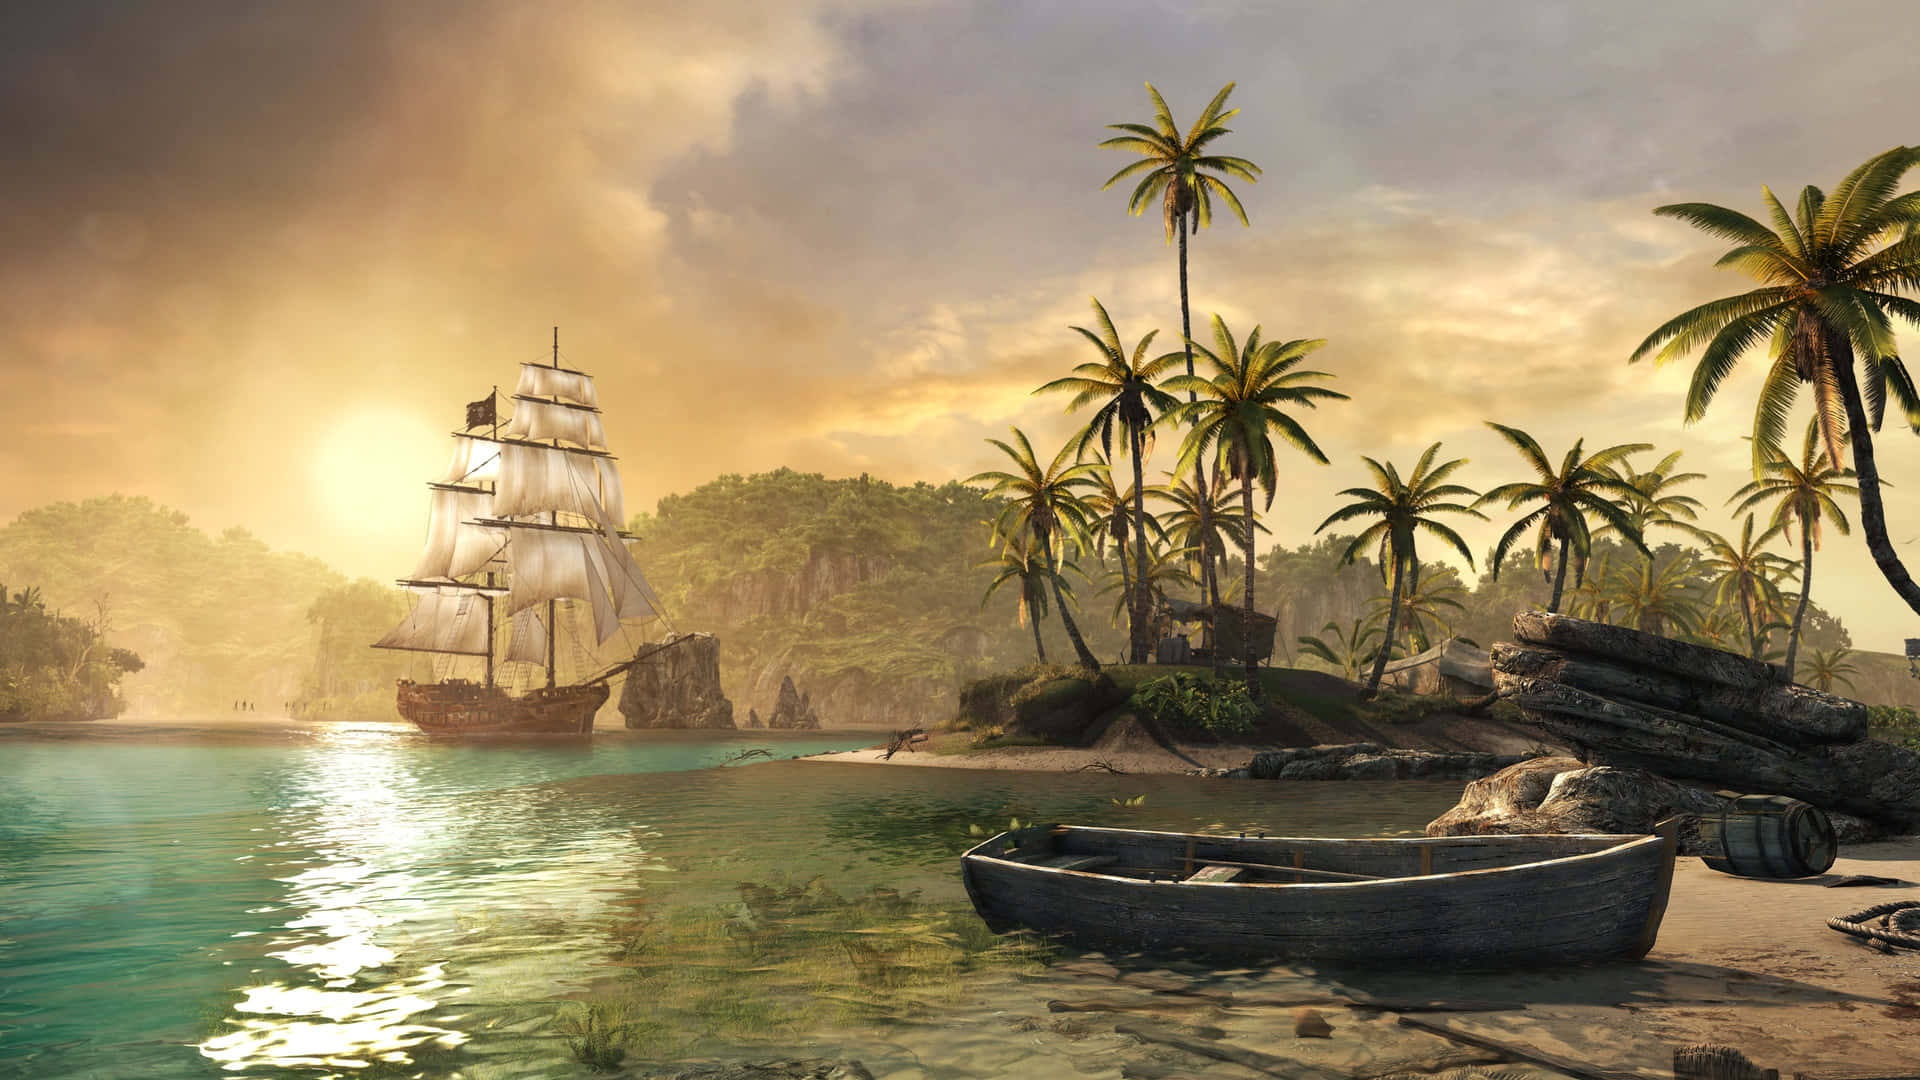 Captain Jack Sparrow embarks on an epic adventure in Pirates of the Caribbean